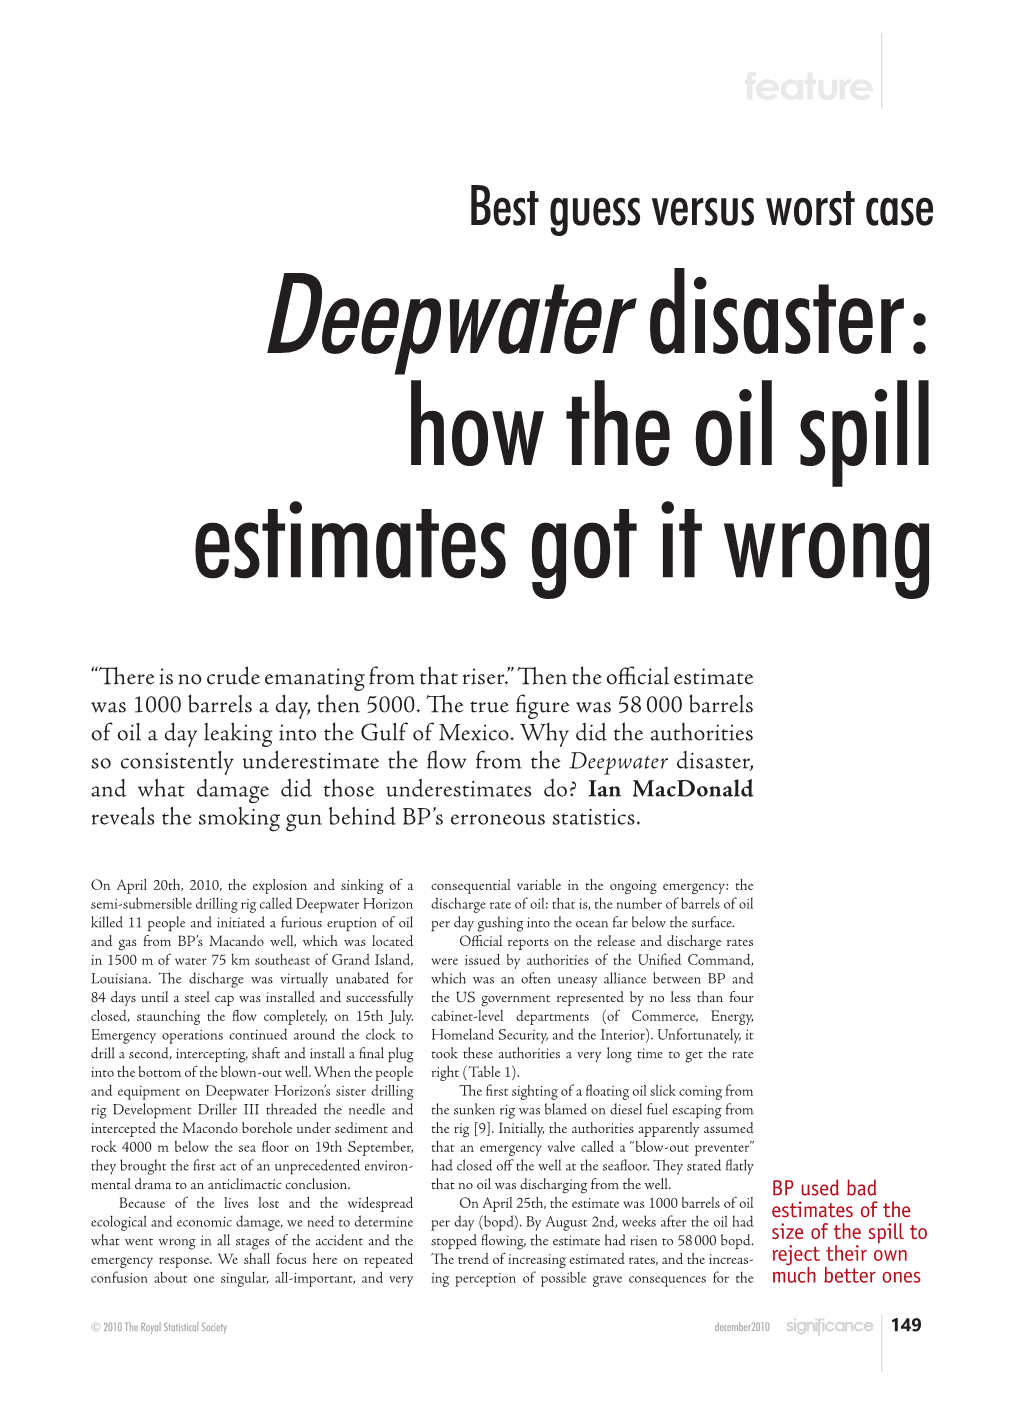 Deepwater Disaster: How the Oil Spill Estimates Got It Wrong